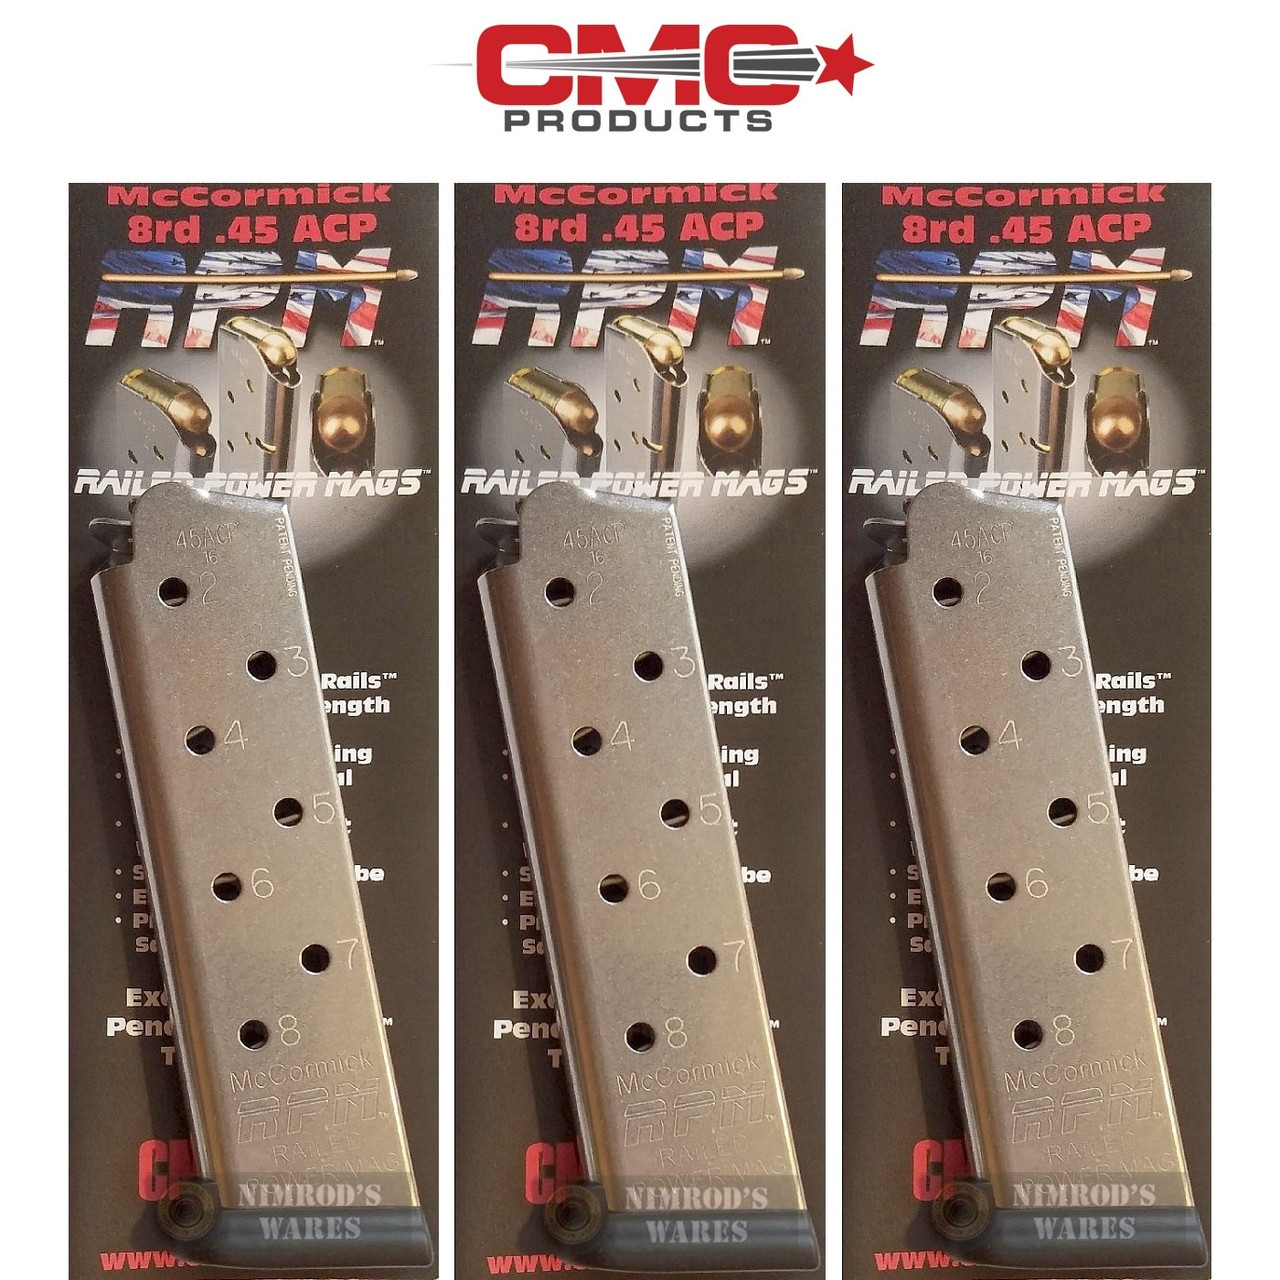 Chip McCormick Railed Power Mag RPM 45 ACP 1911 8rd Magazine 17130 for sale online 